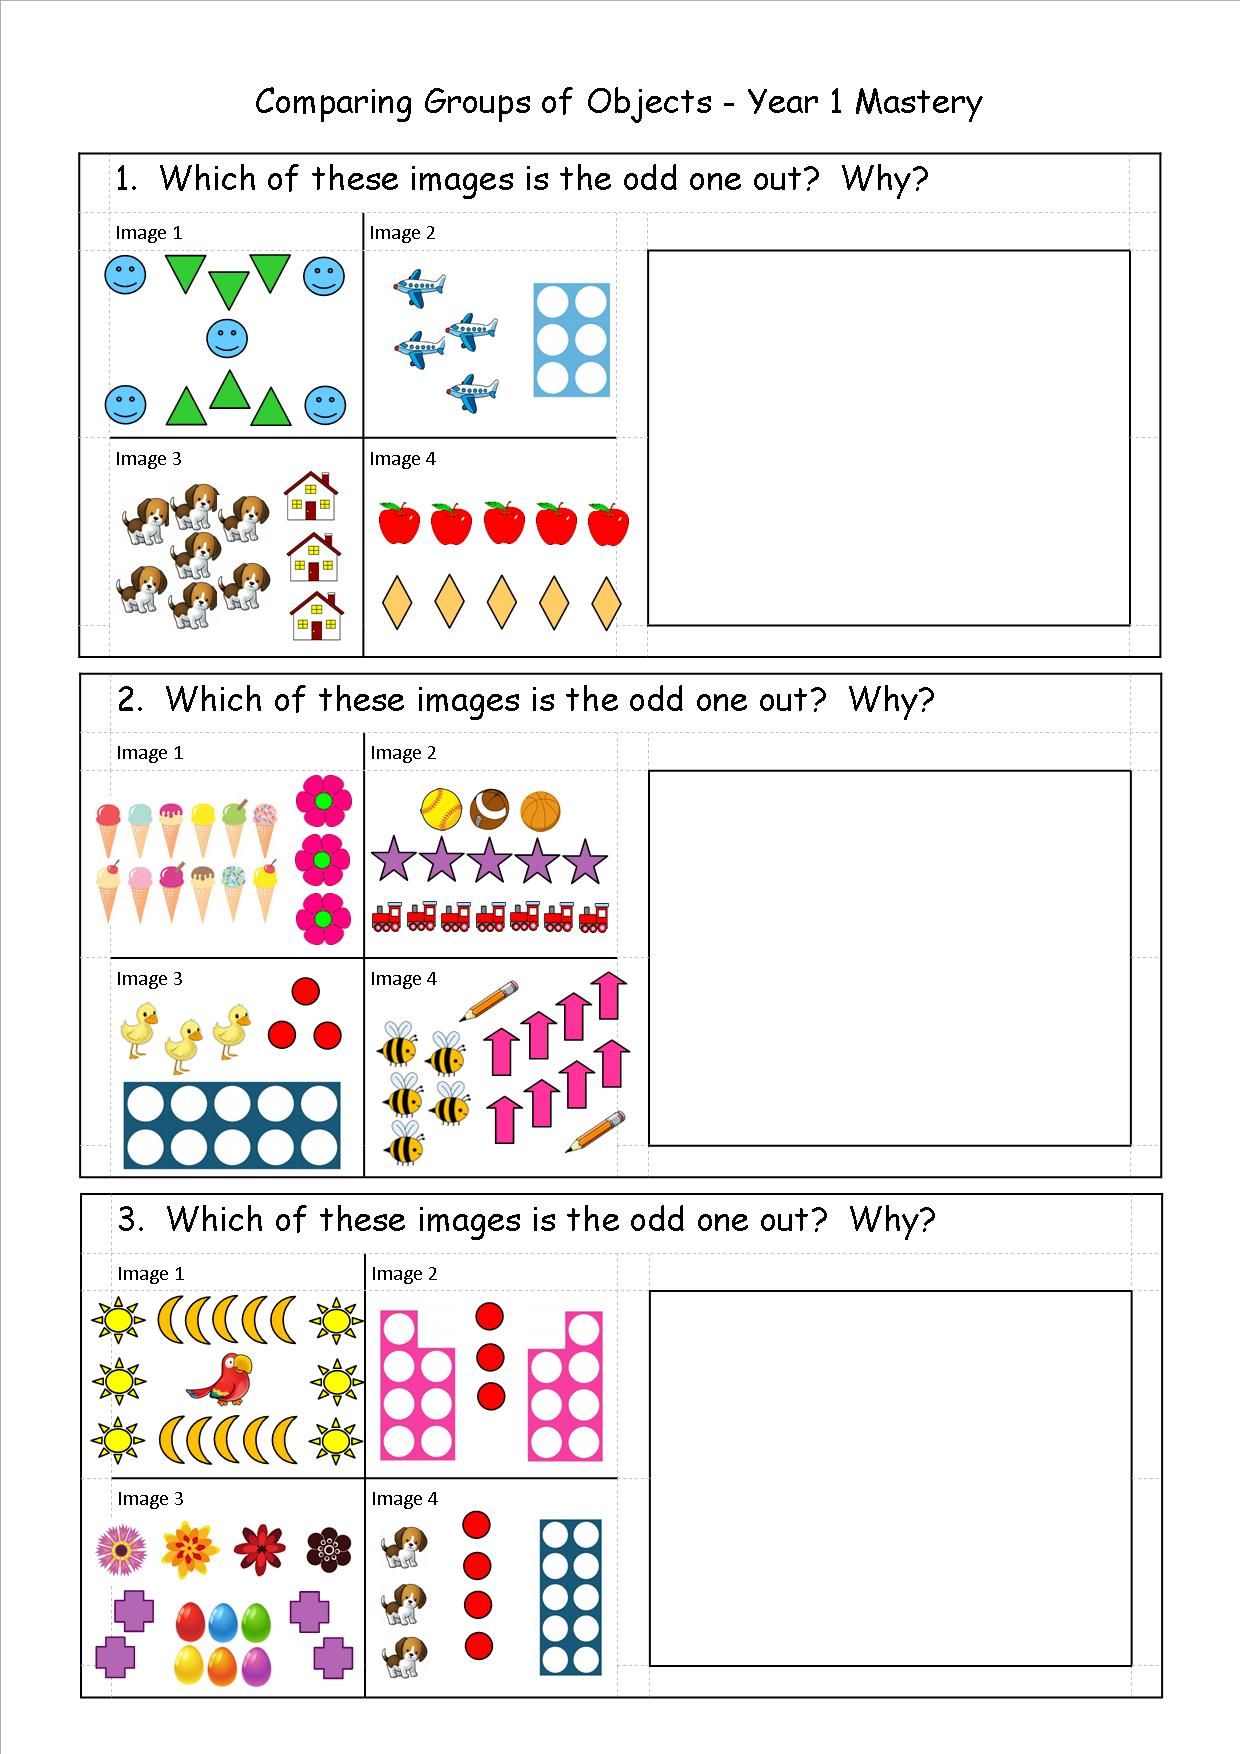 year 1 maths problem solving activities